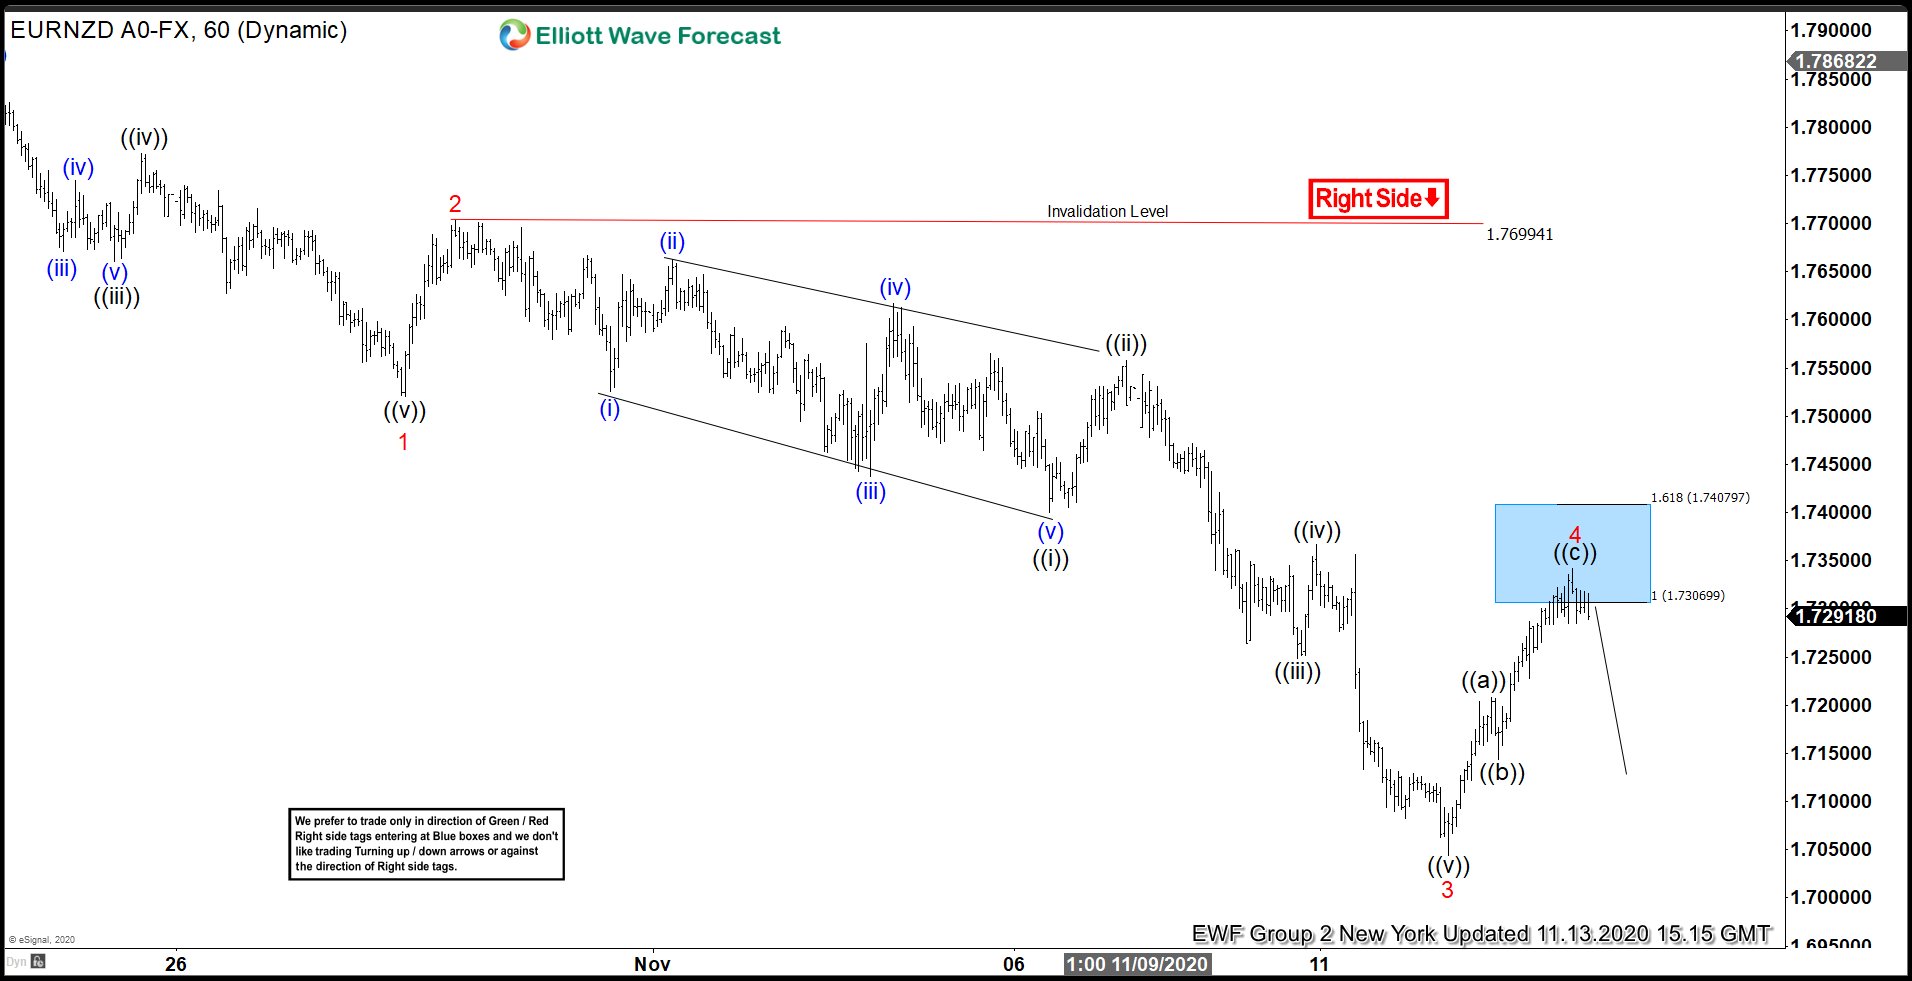 EURNZD Gets Rejected in Blue Box and Makes New Lows